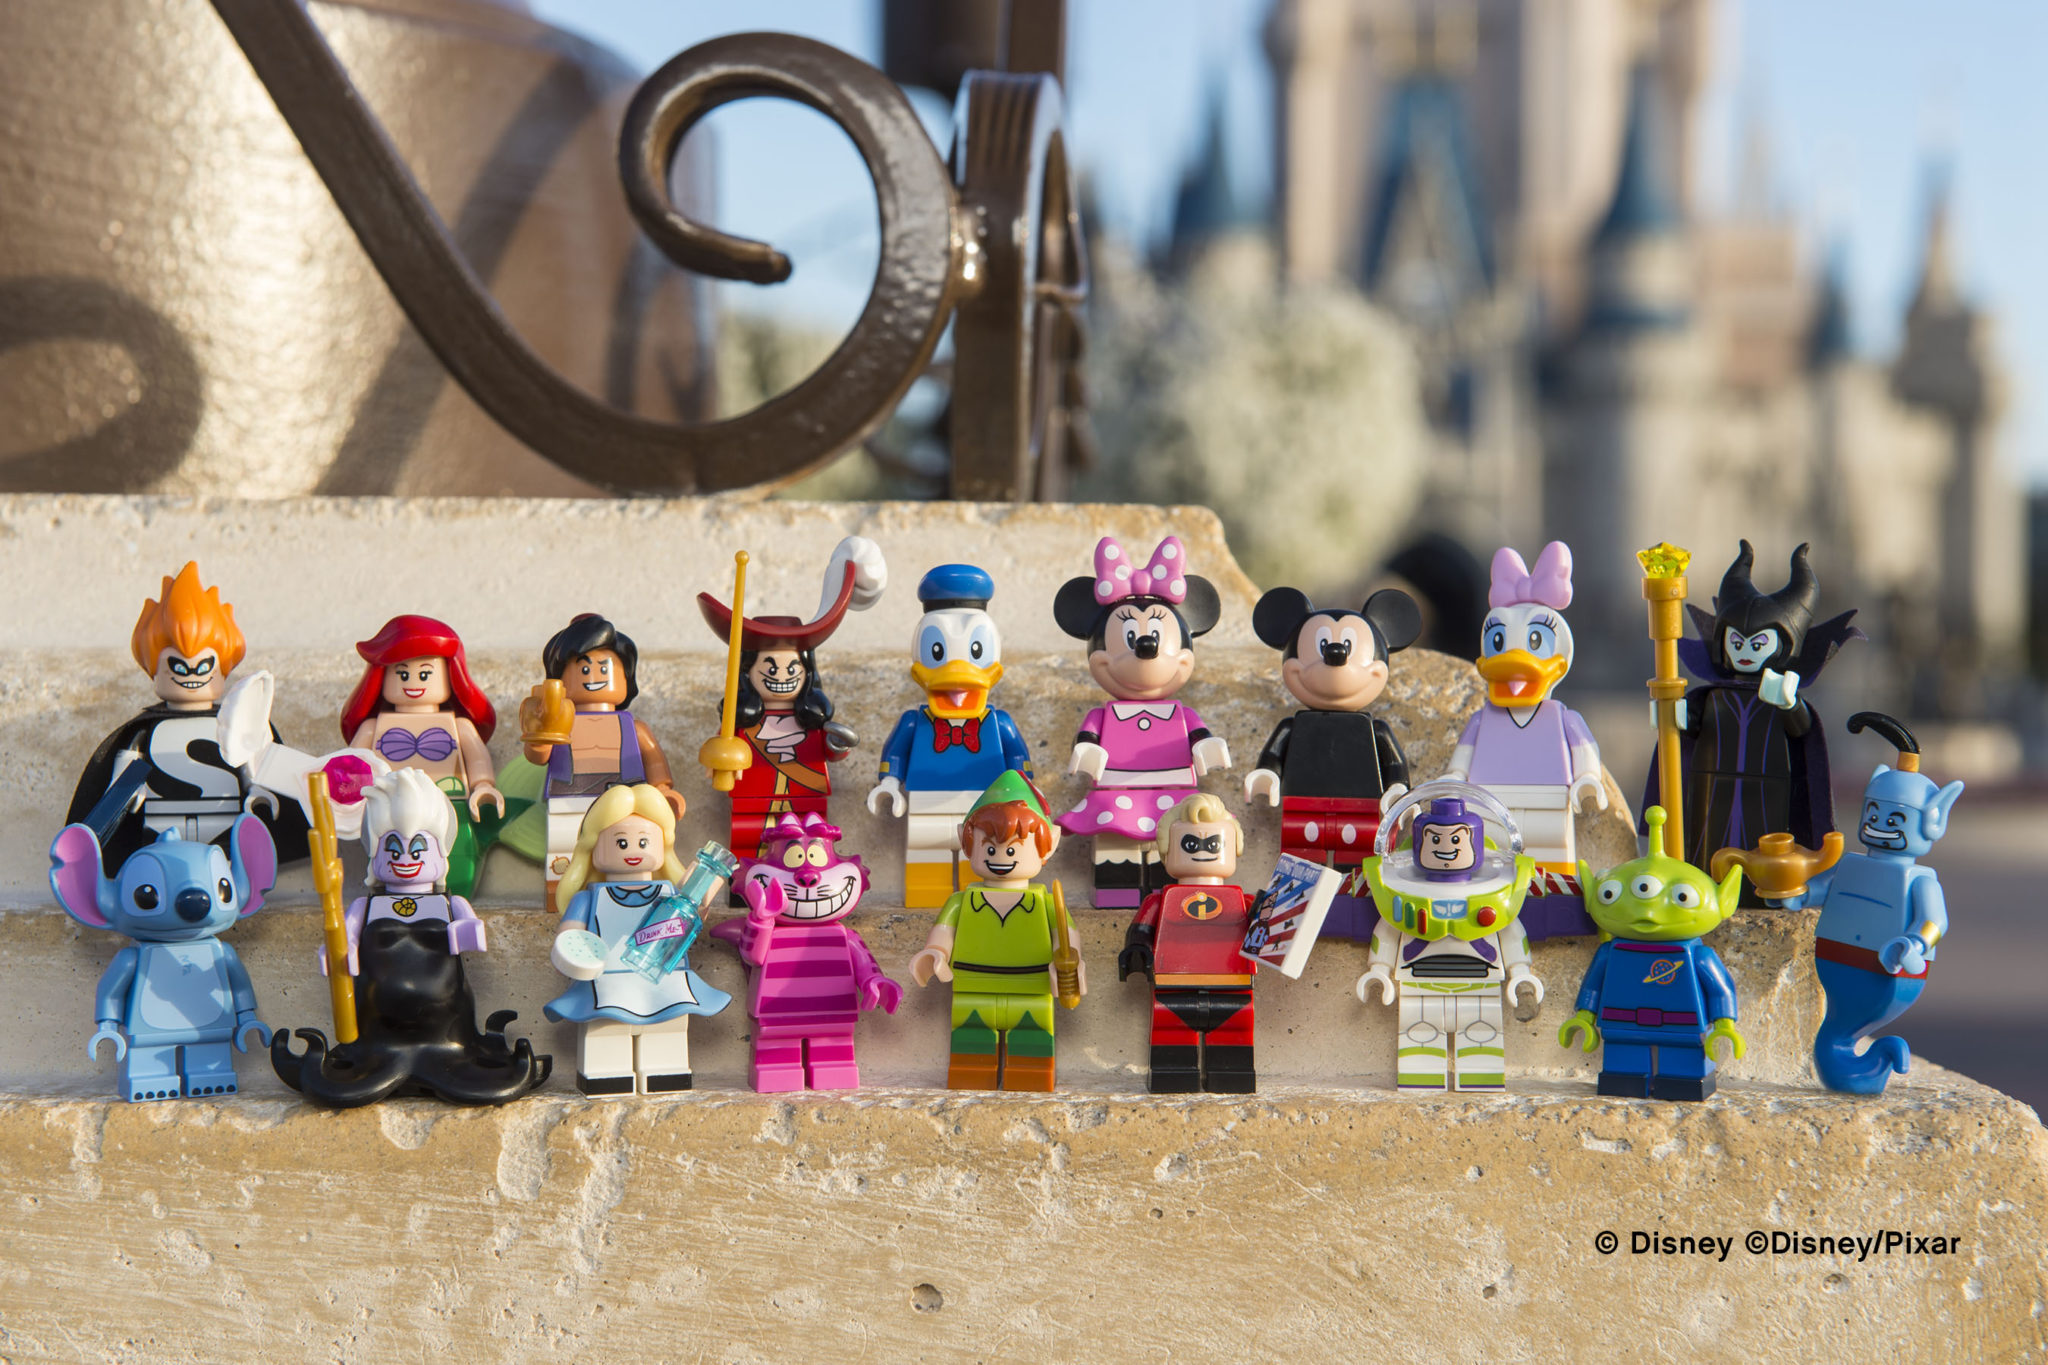 Complete your Lego Disney Castle with Lego Disney Minifigures Chip